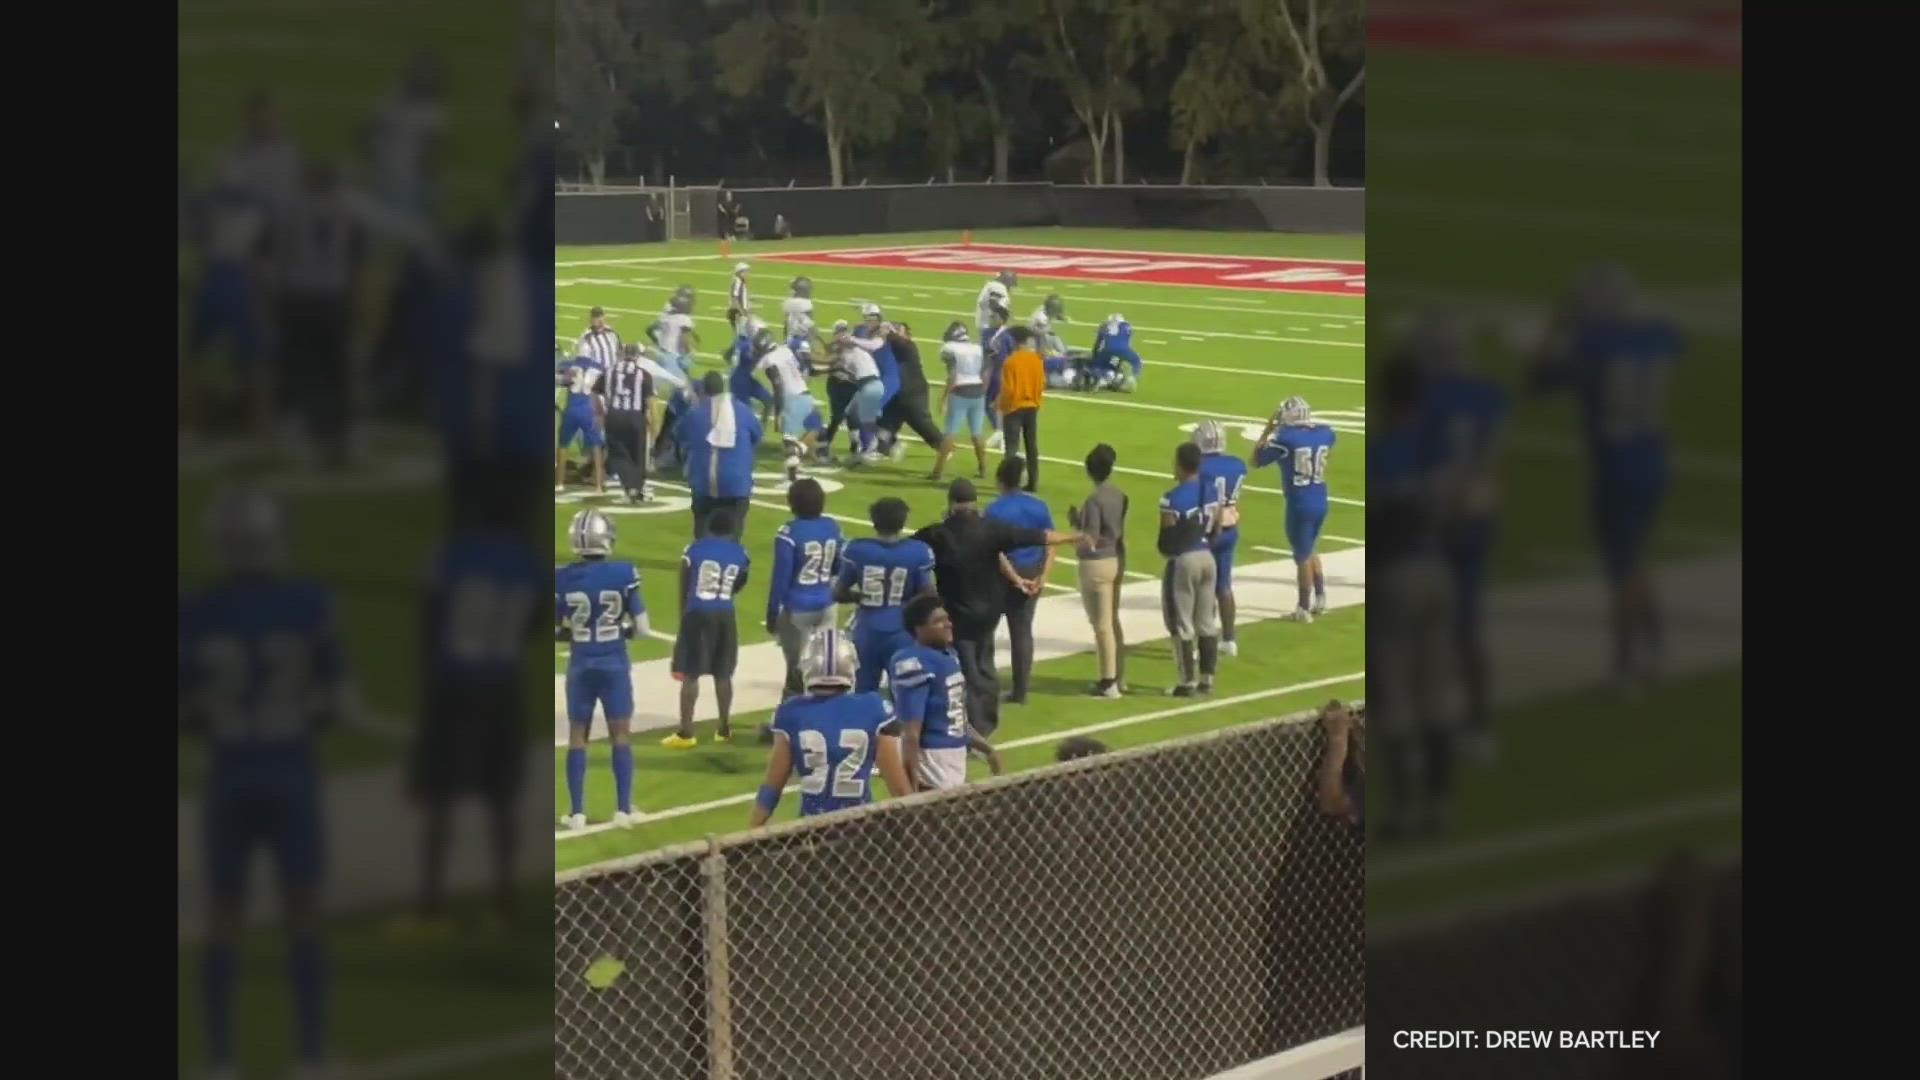 Drew Bartley captured an on-the-field brawl between Eastern Hills and Dallas Roosevelt.